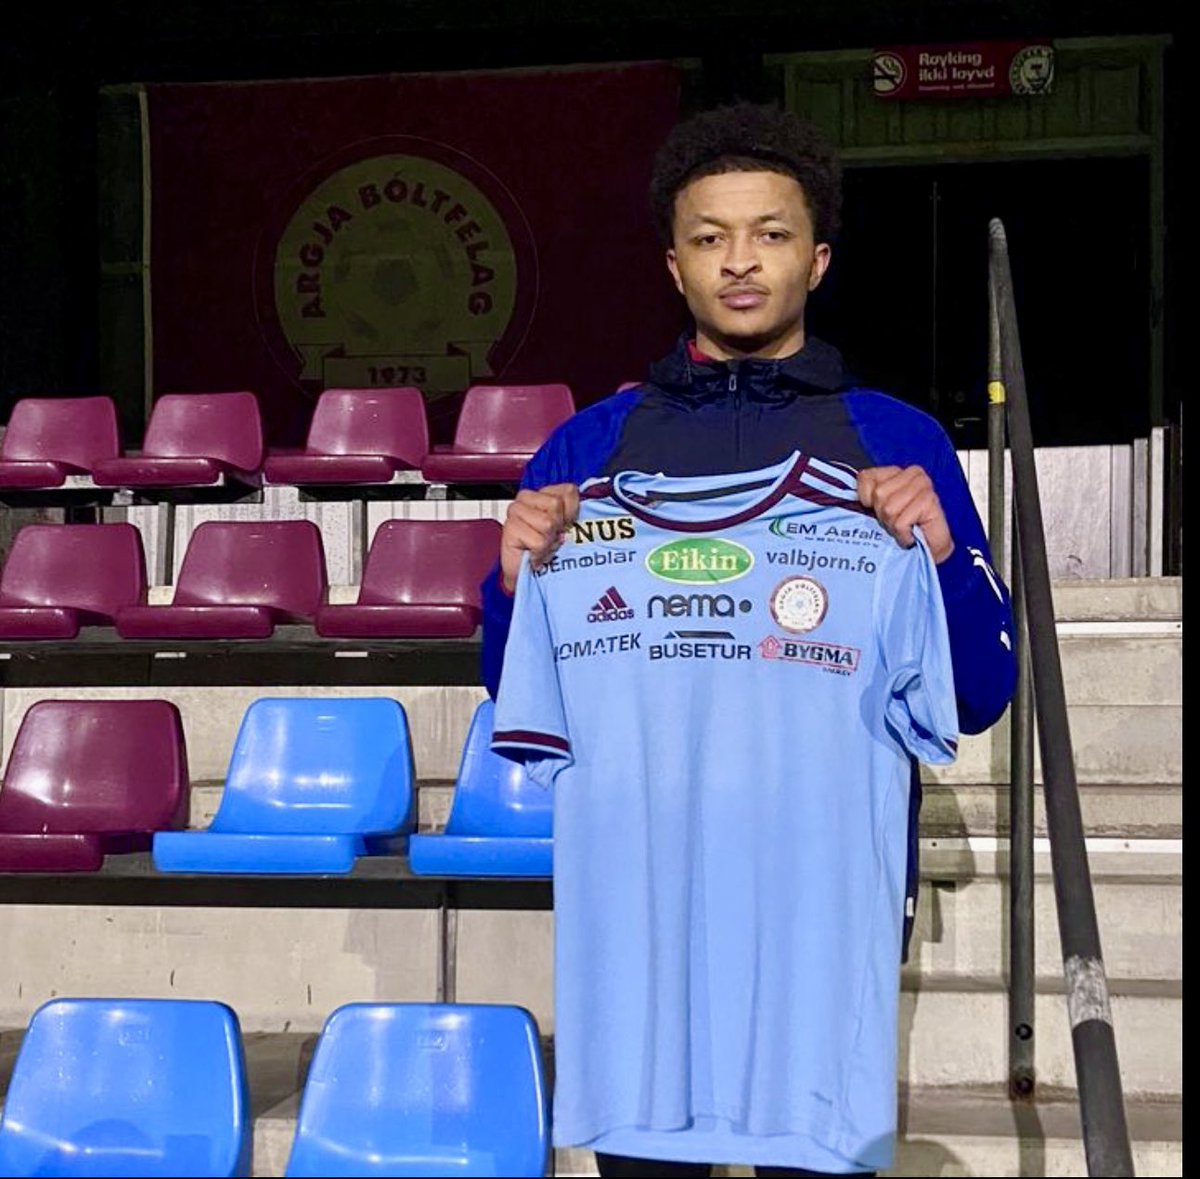 🇫🇴 Marley Blair has joined AB Argir. The winger left Farsley Celtic last week in order to move to the Faroe Islands. The 24-year-old has previously played abroad in Iceland, making 21 top-flight appearances for Keflavík. His new side compete in the second-tier, having been